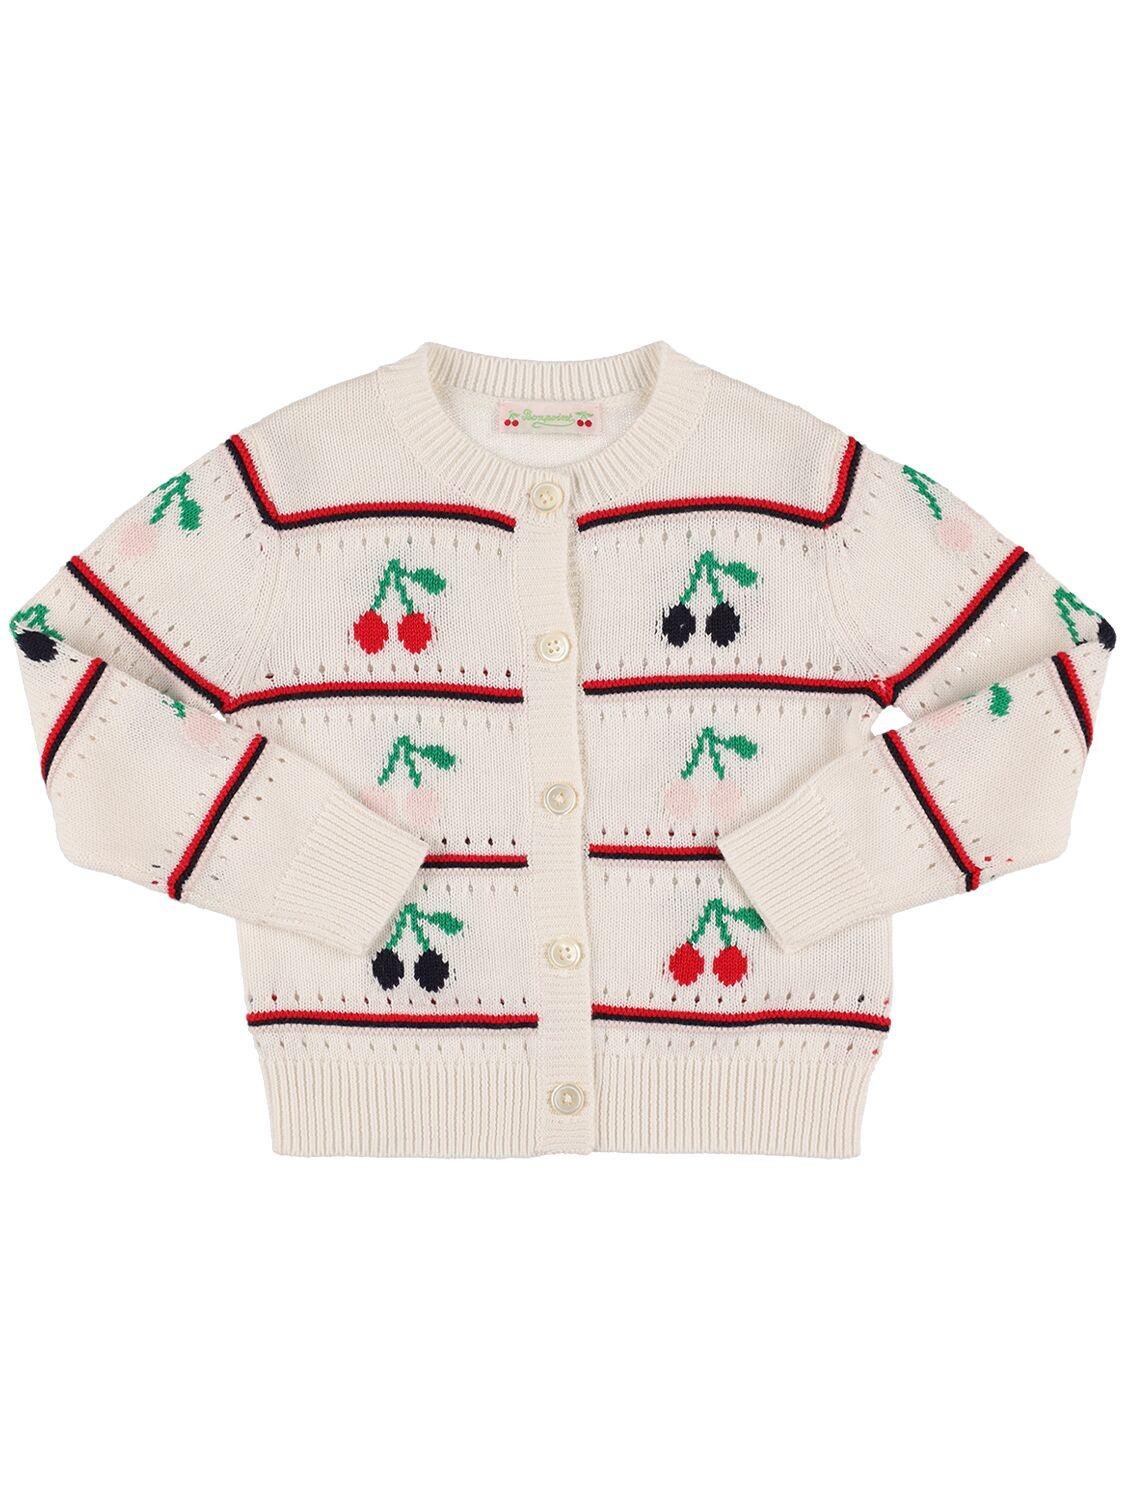 Cherry Embroidered Cotton Knit Cardigan by BONPOINT